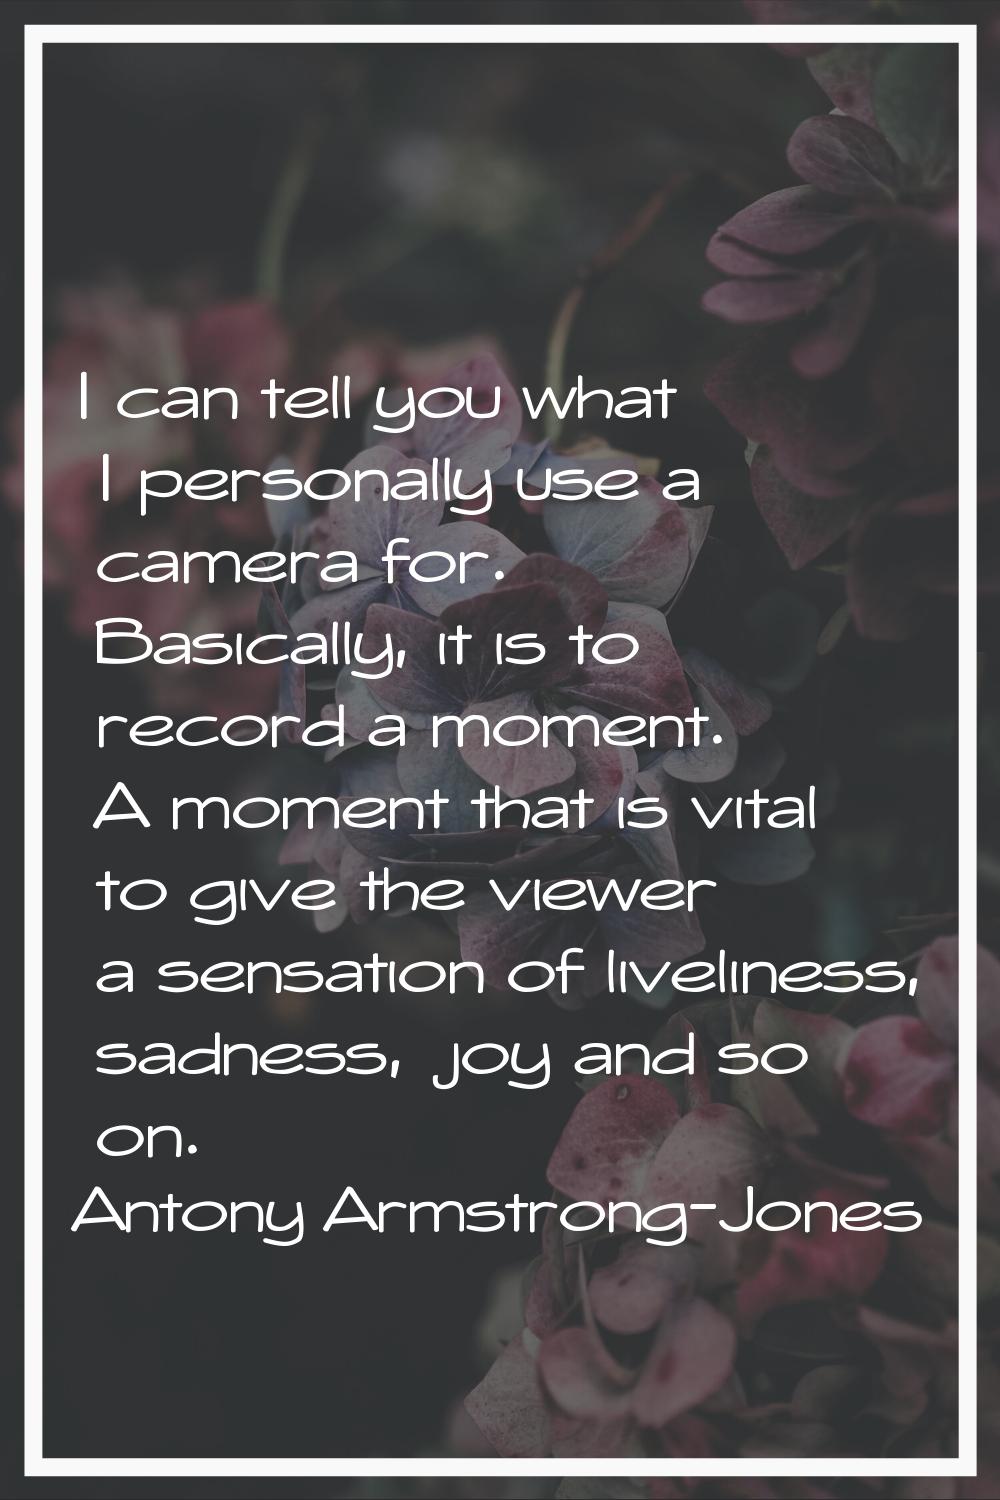 I can tell you what I personally use a camera for. Basically, it is to record a moment. A moment th